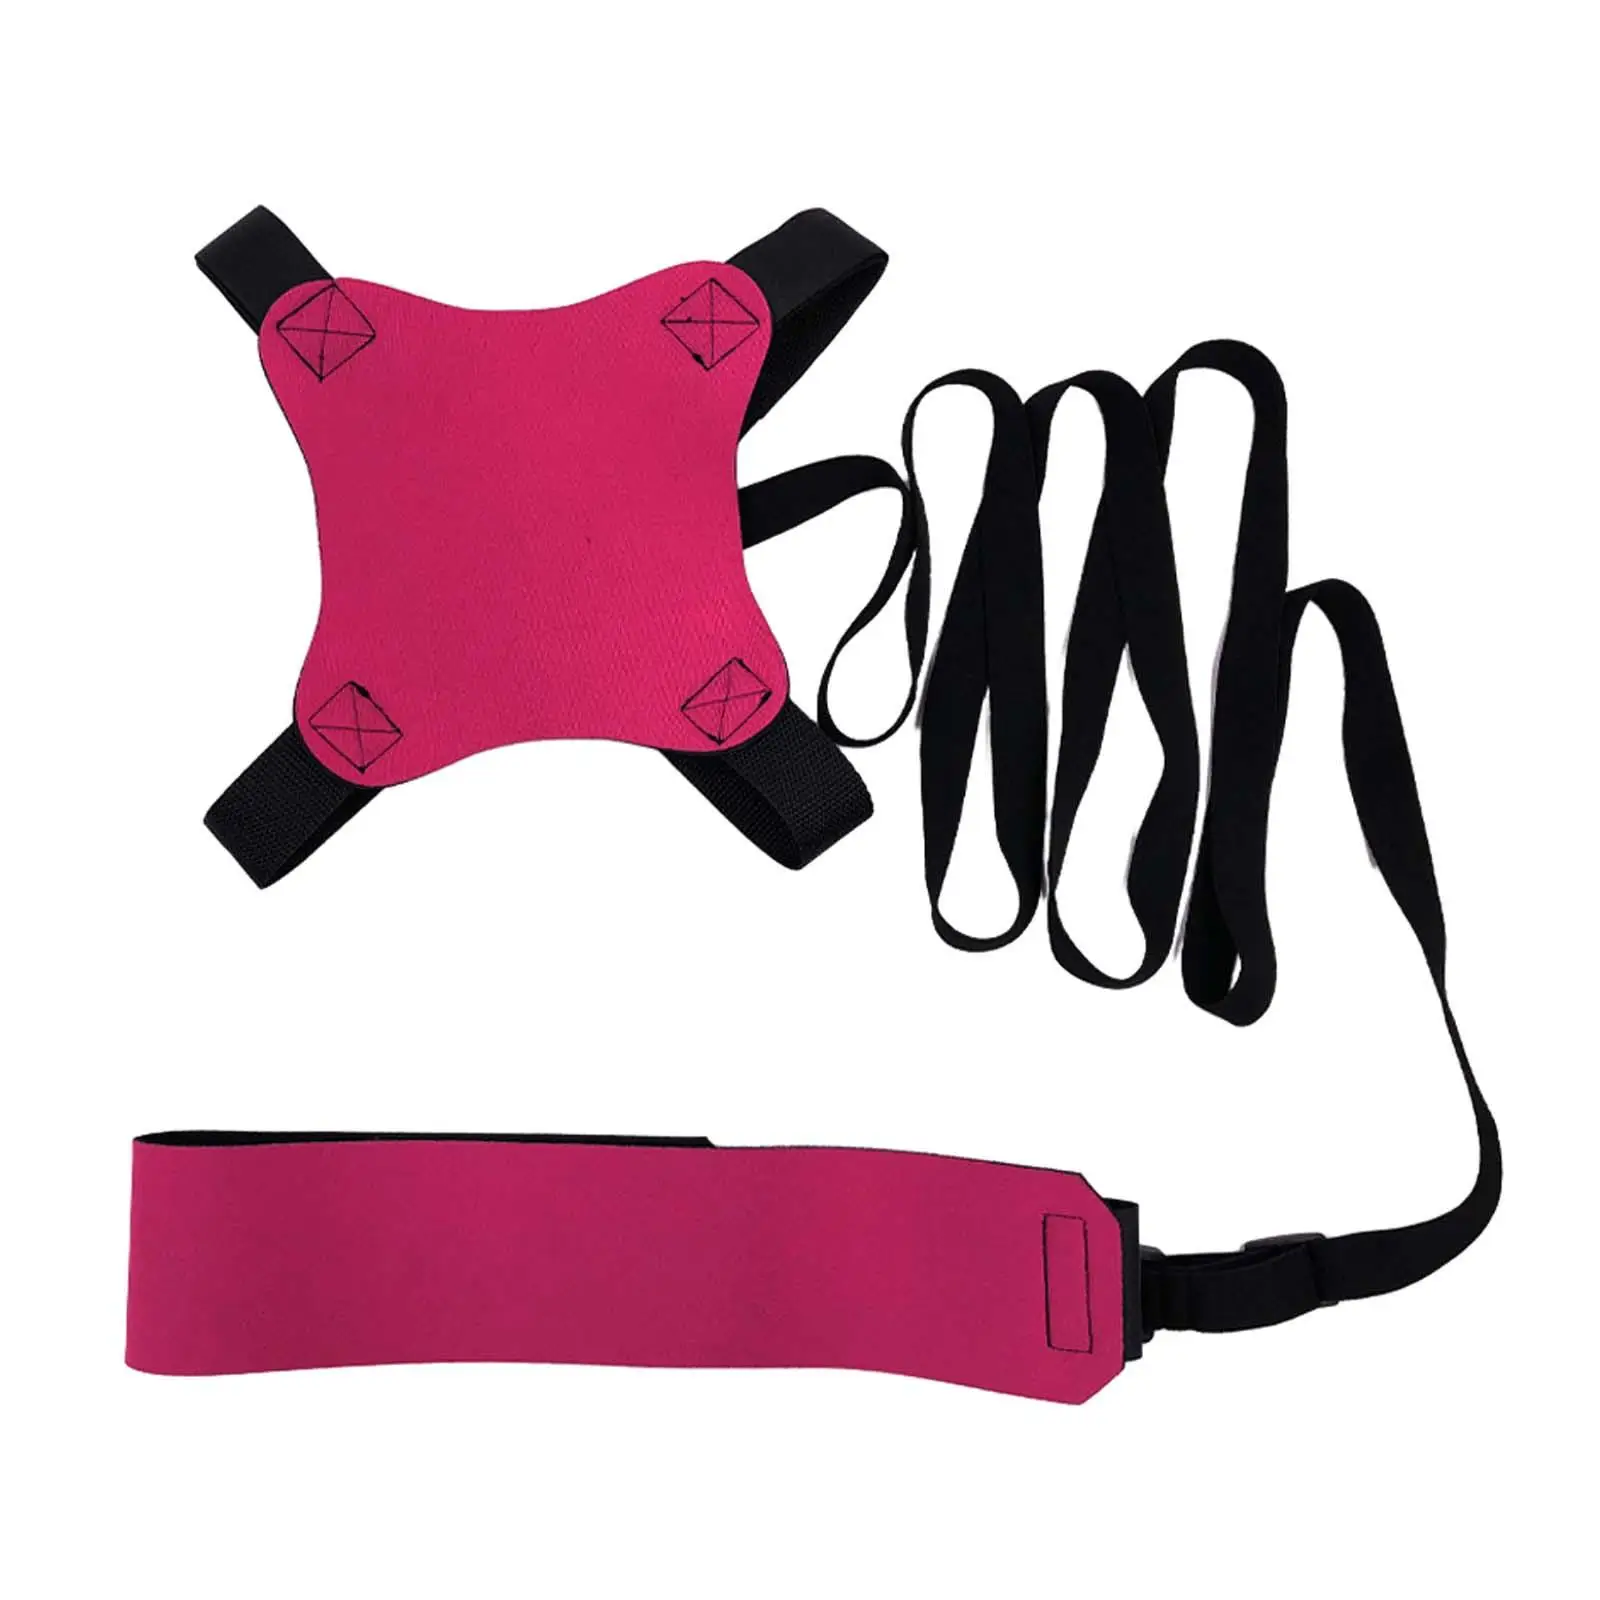 Volleyball Training Belt Adjustable for Practicing Serving Spiking Setting